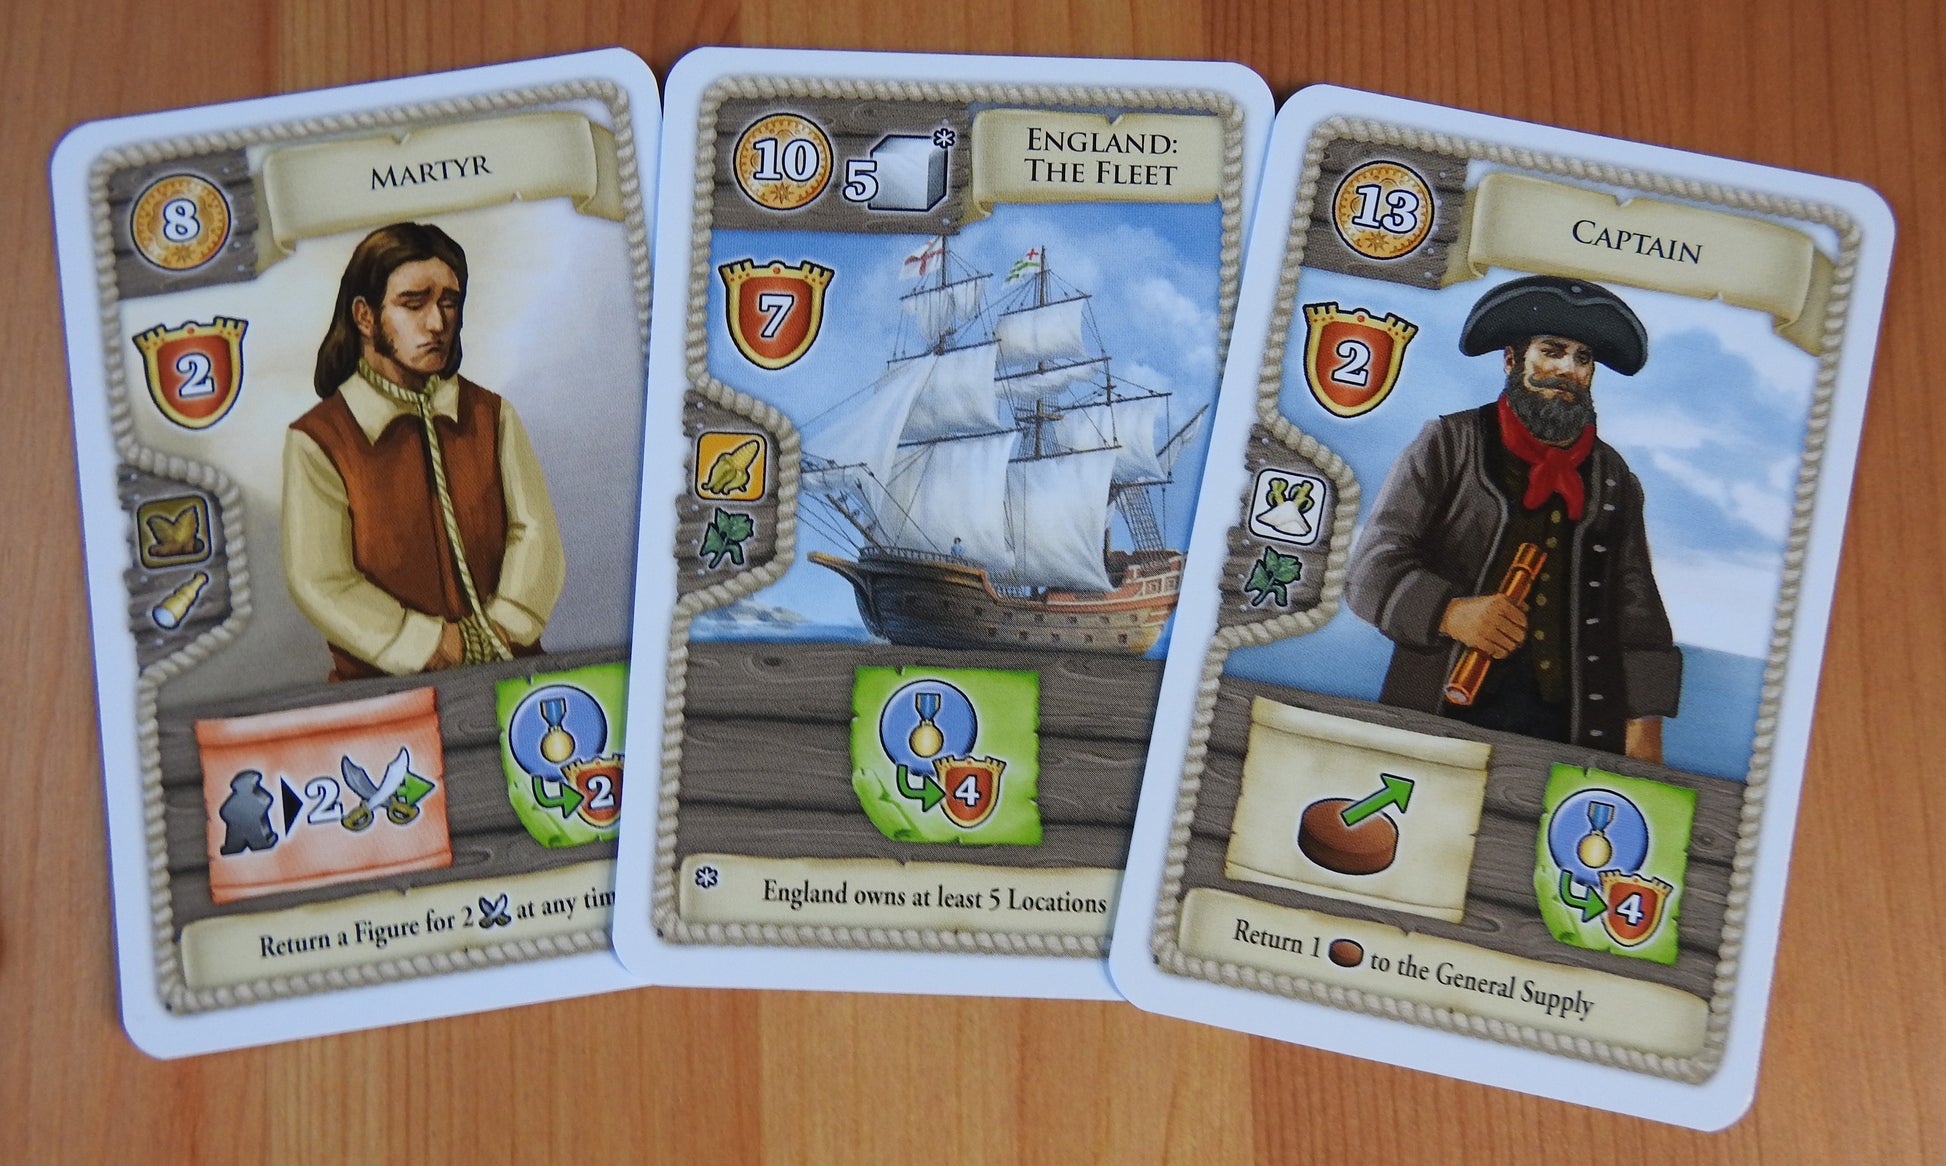 Close-up view of three cards - Martyr, England: The Fleet and the Captain.